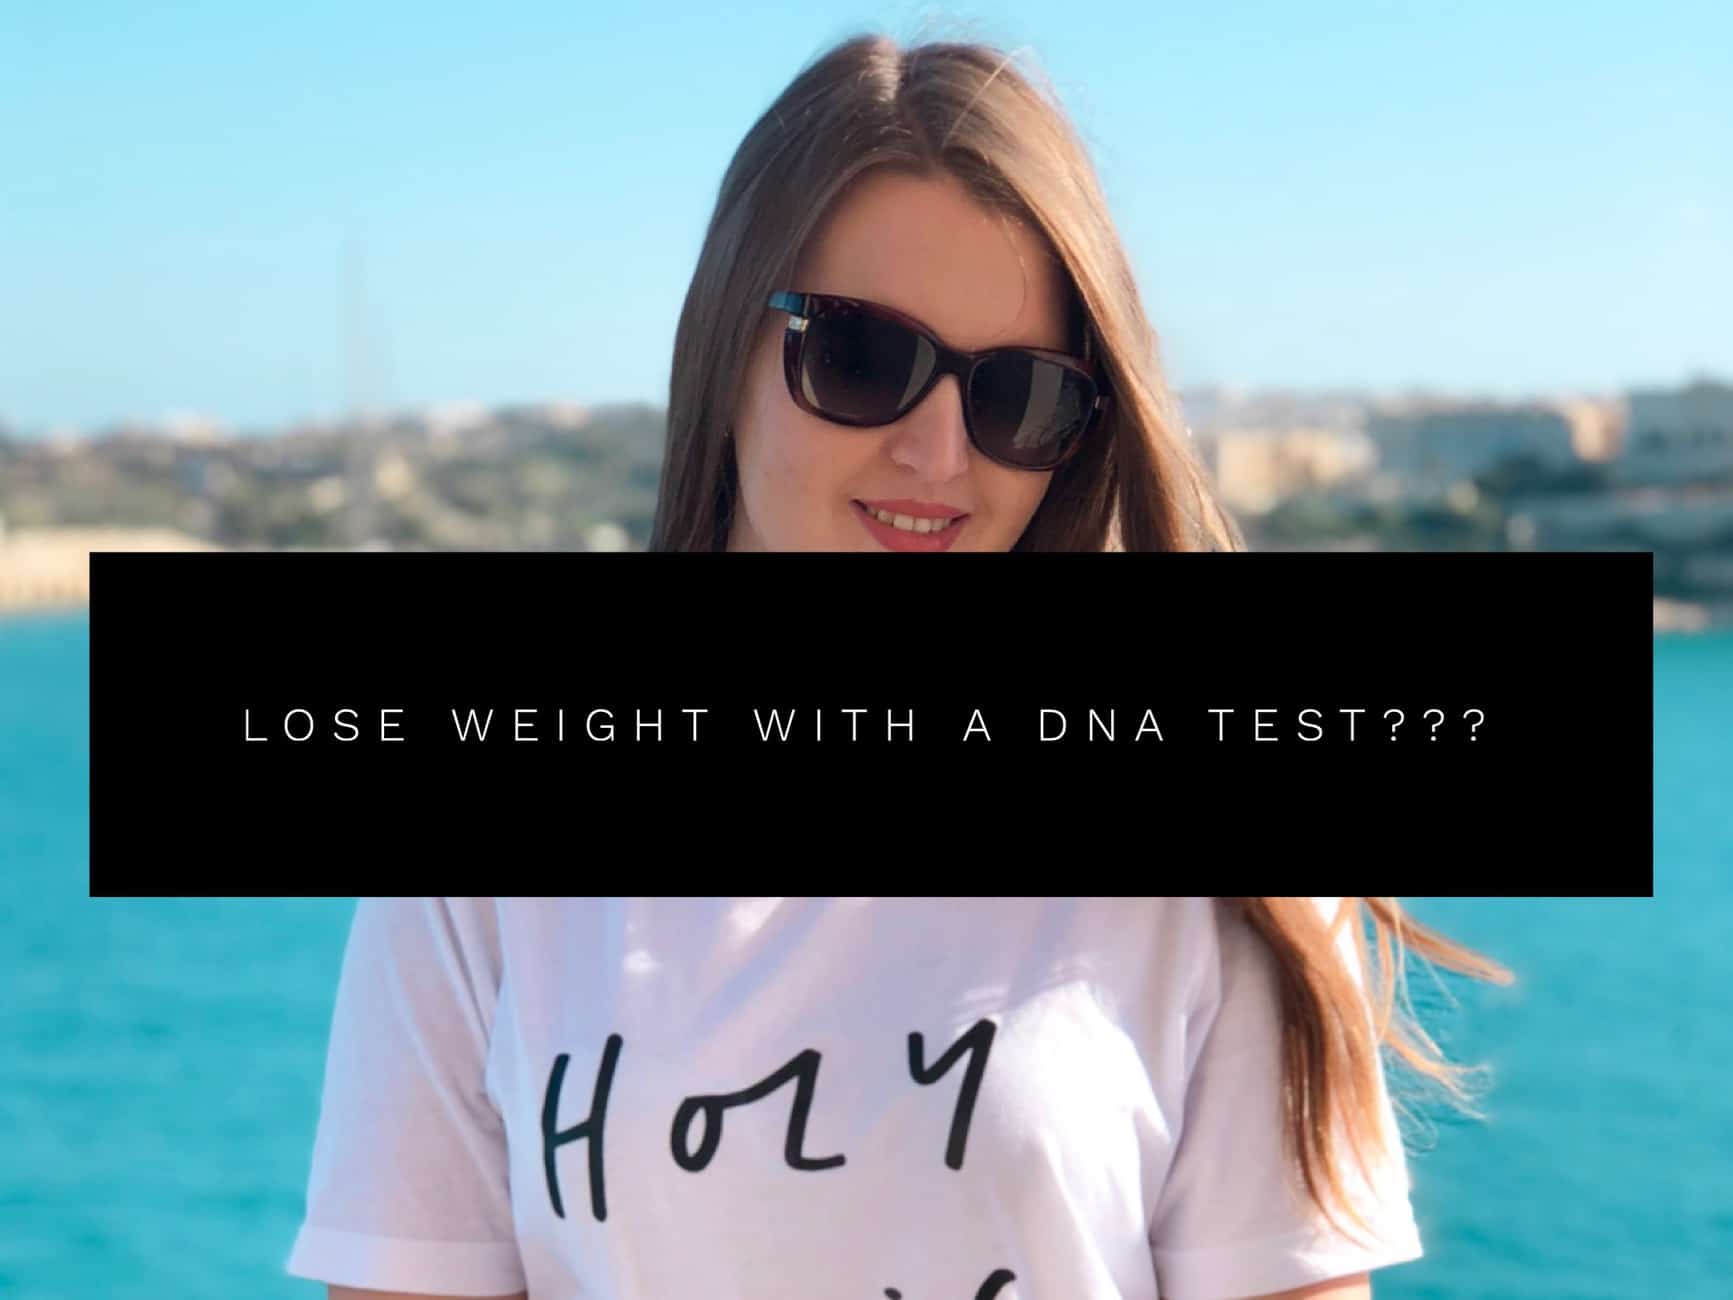 How to lose weight & look great in photos (healthy weight DNA test review)